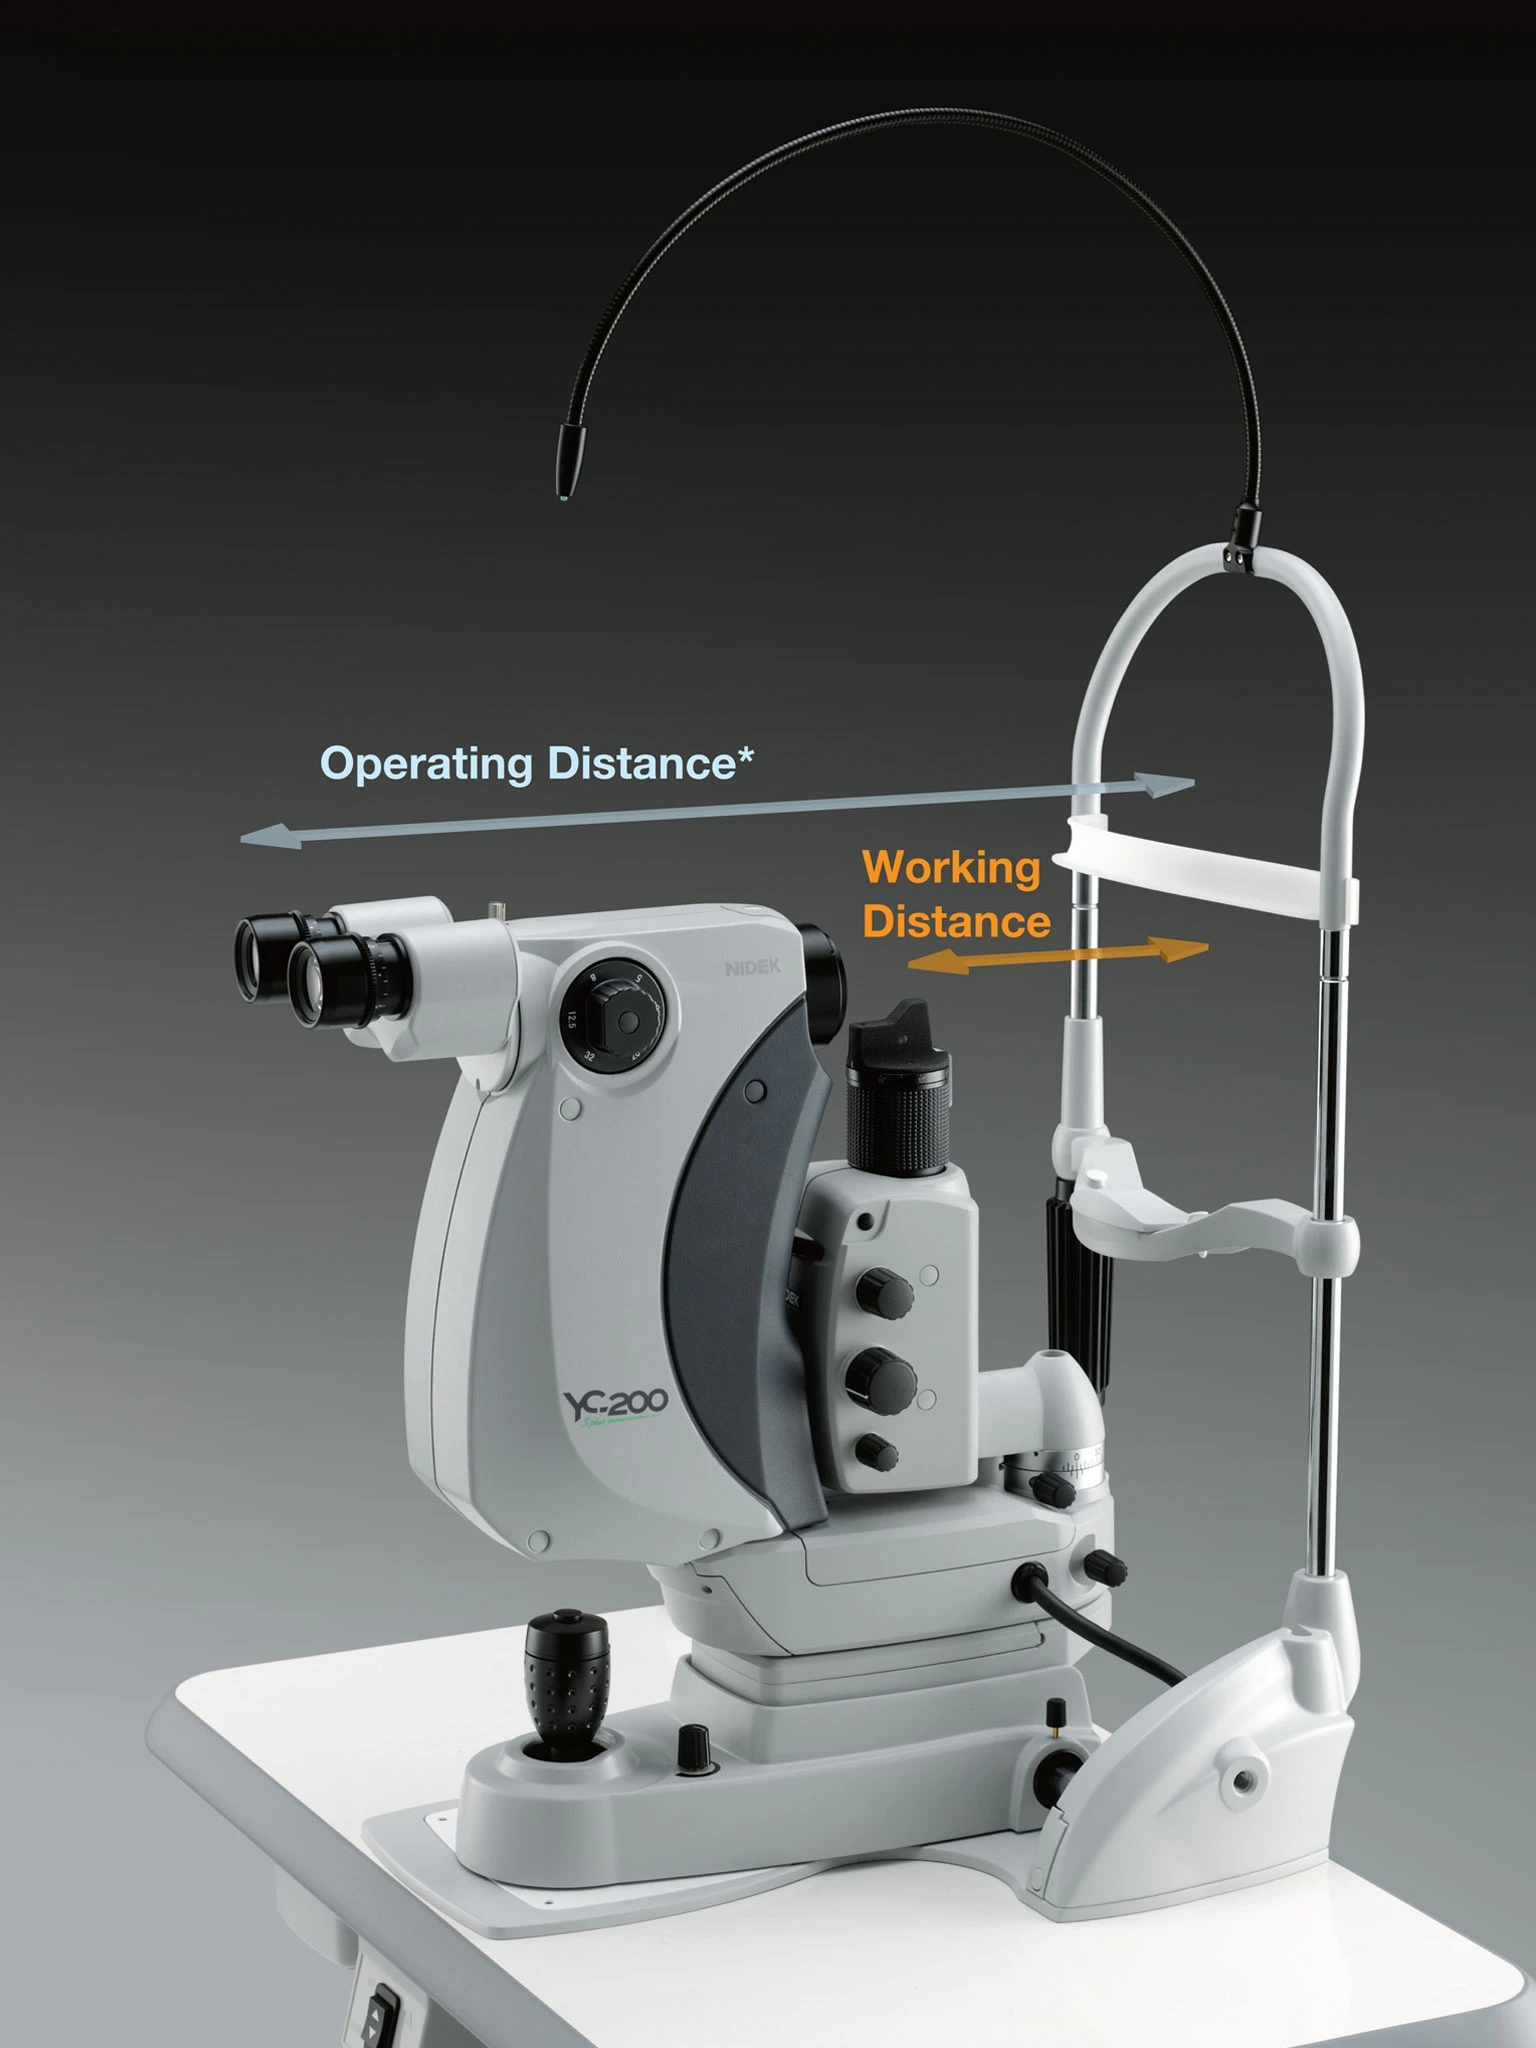 A Medical Device Used For Eye Examinations, Featuring Binocular Lenses And Various Controls. The Image Has Labeled Markers Indicating &Quot;Operating Distance&Quot; And &Quot;Working Distance.&Quot; The Nidek-Labeled Device, Model Xc-200, Is Mounted On A White Surface Against A Dark Background.